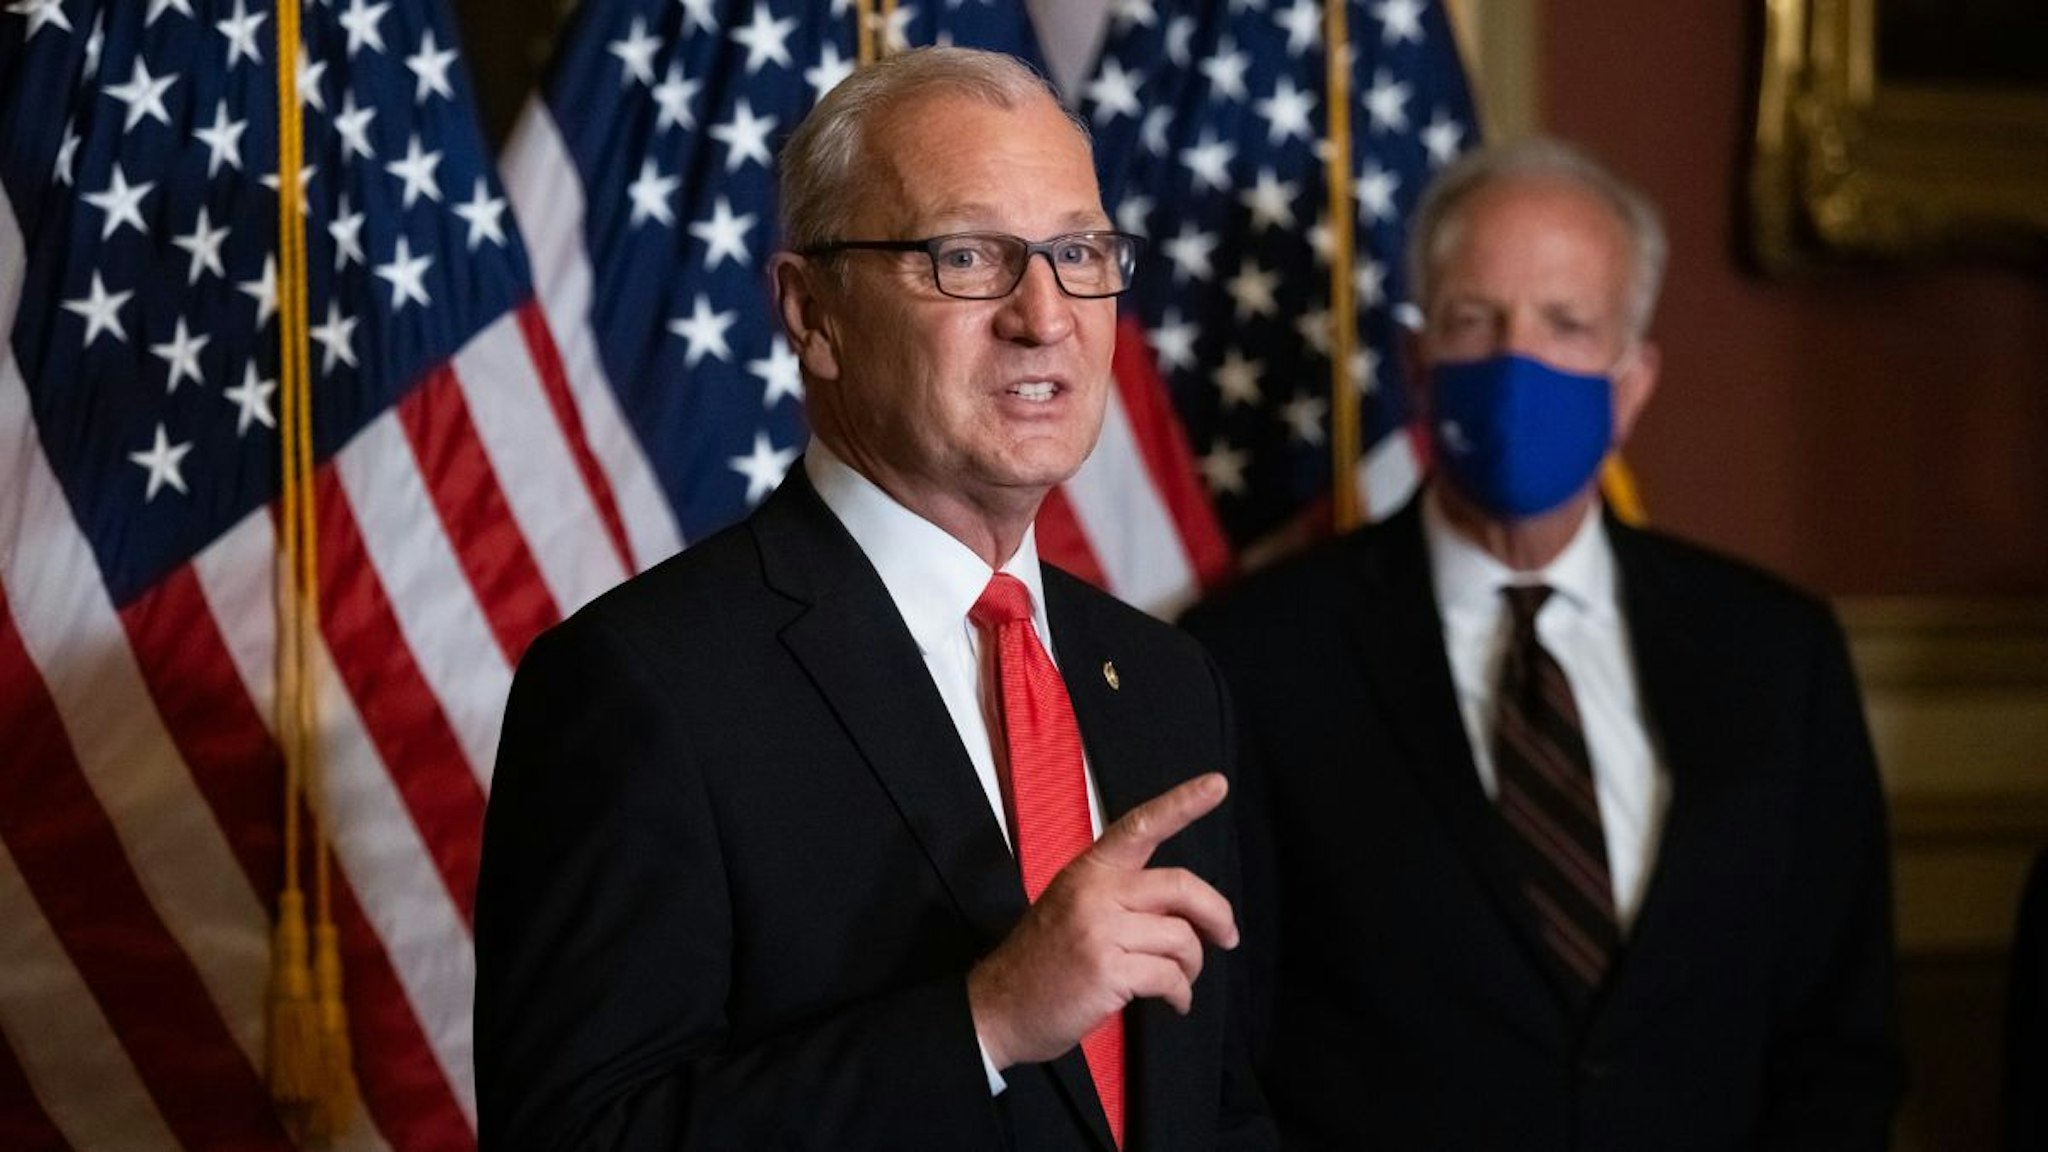 Senator Kevin Cramer, a Republican from North Dakota, speaks during a news conference at the U.S. Capitol in Washington, D.C., U.S., on Monday, Oct. 26, 2020.